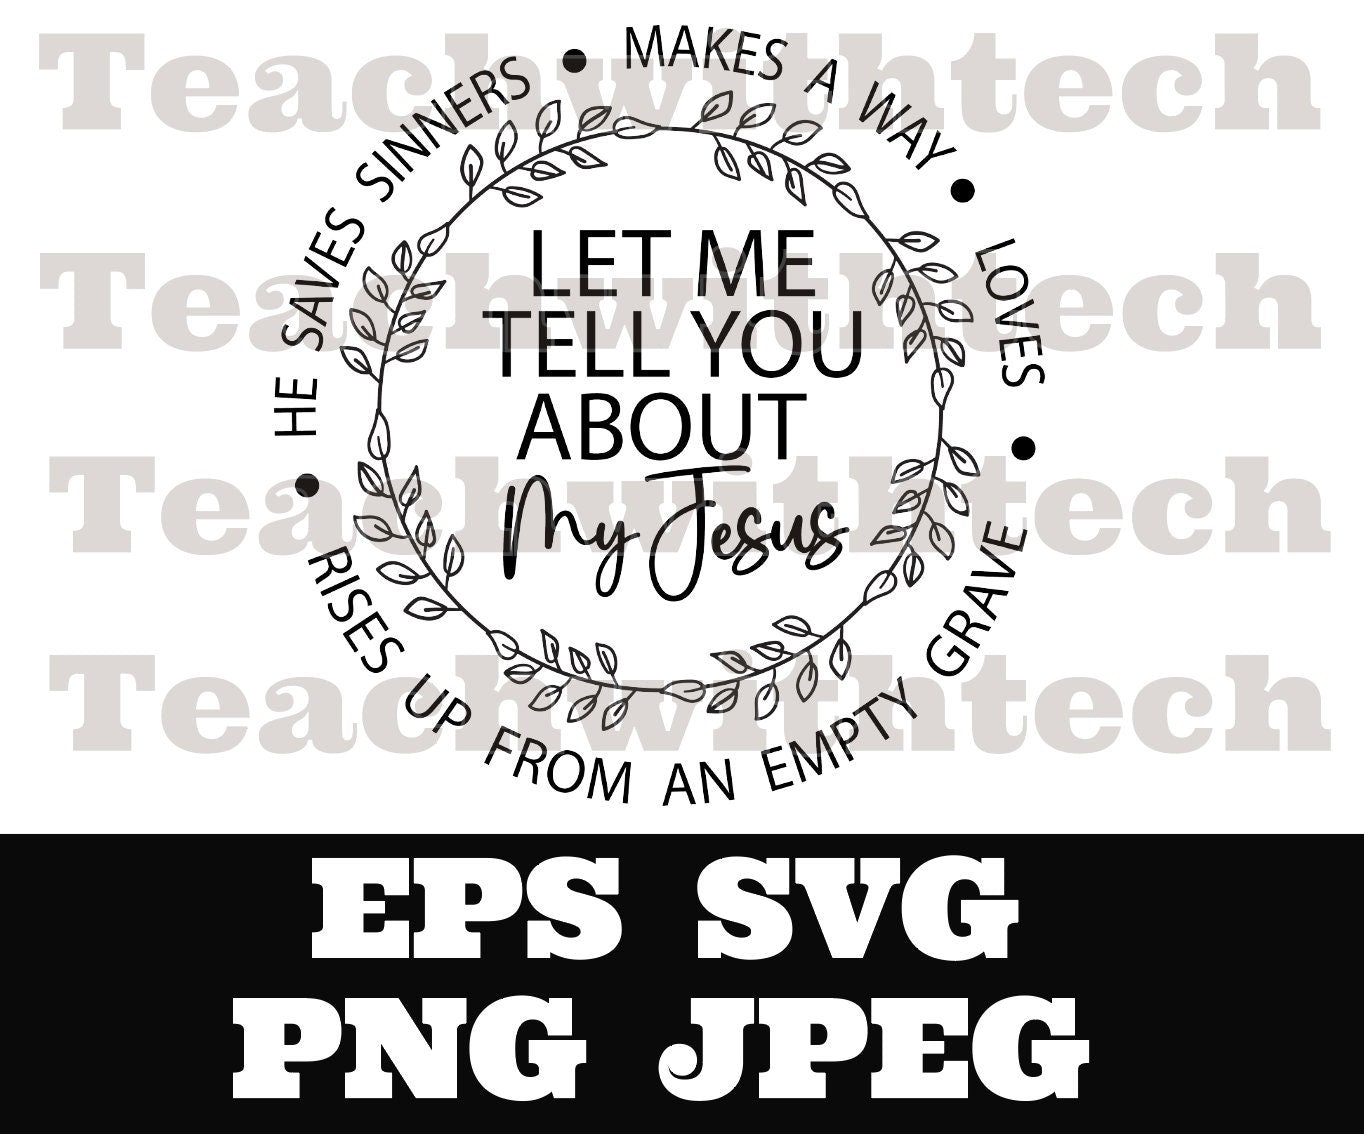 Let me tell you about my Jesus  -  PNG EPS SVG jpeg Download Christian svg Jesus png T shirts vinyl Church ministry download - Religious svg